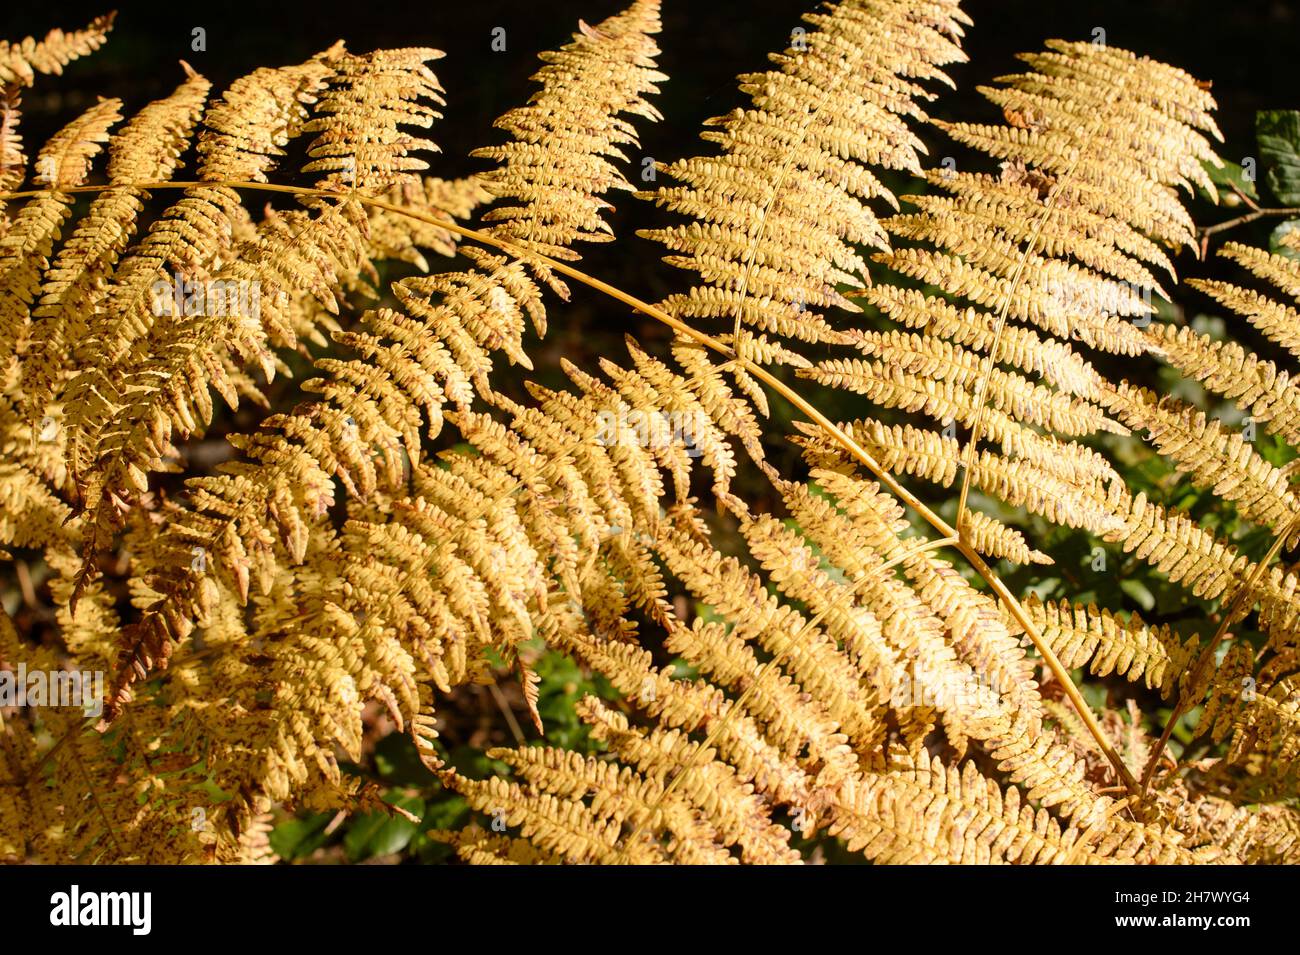 Close-up of a fern leaf Alsace France. Yellowed by the autumn, this fern leaf shines under a sunbeam. Stock Photo